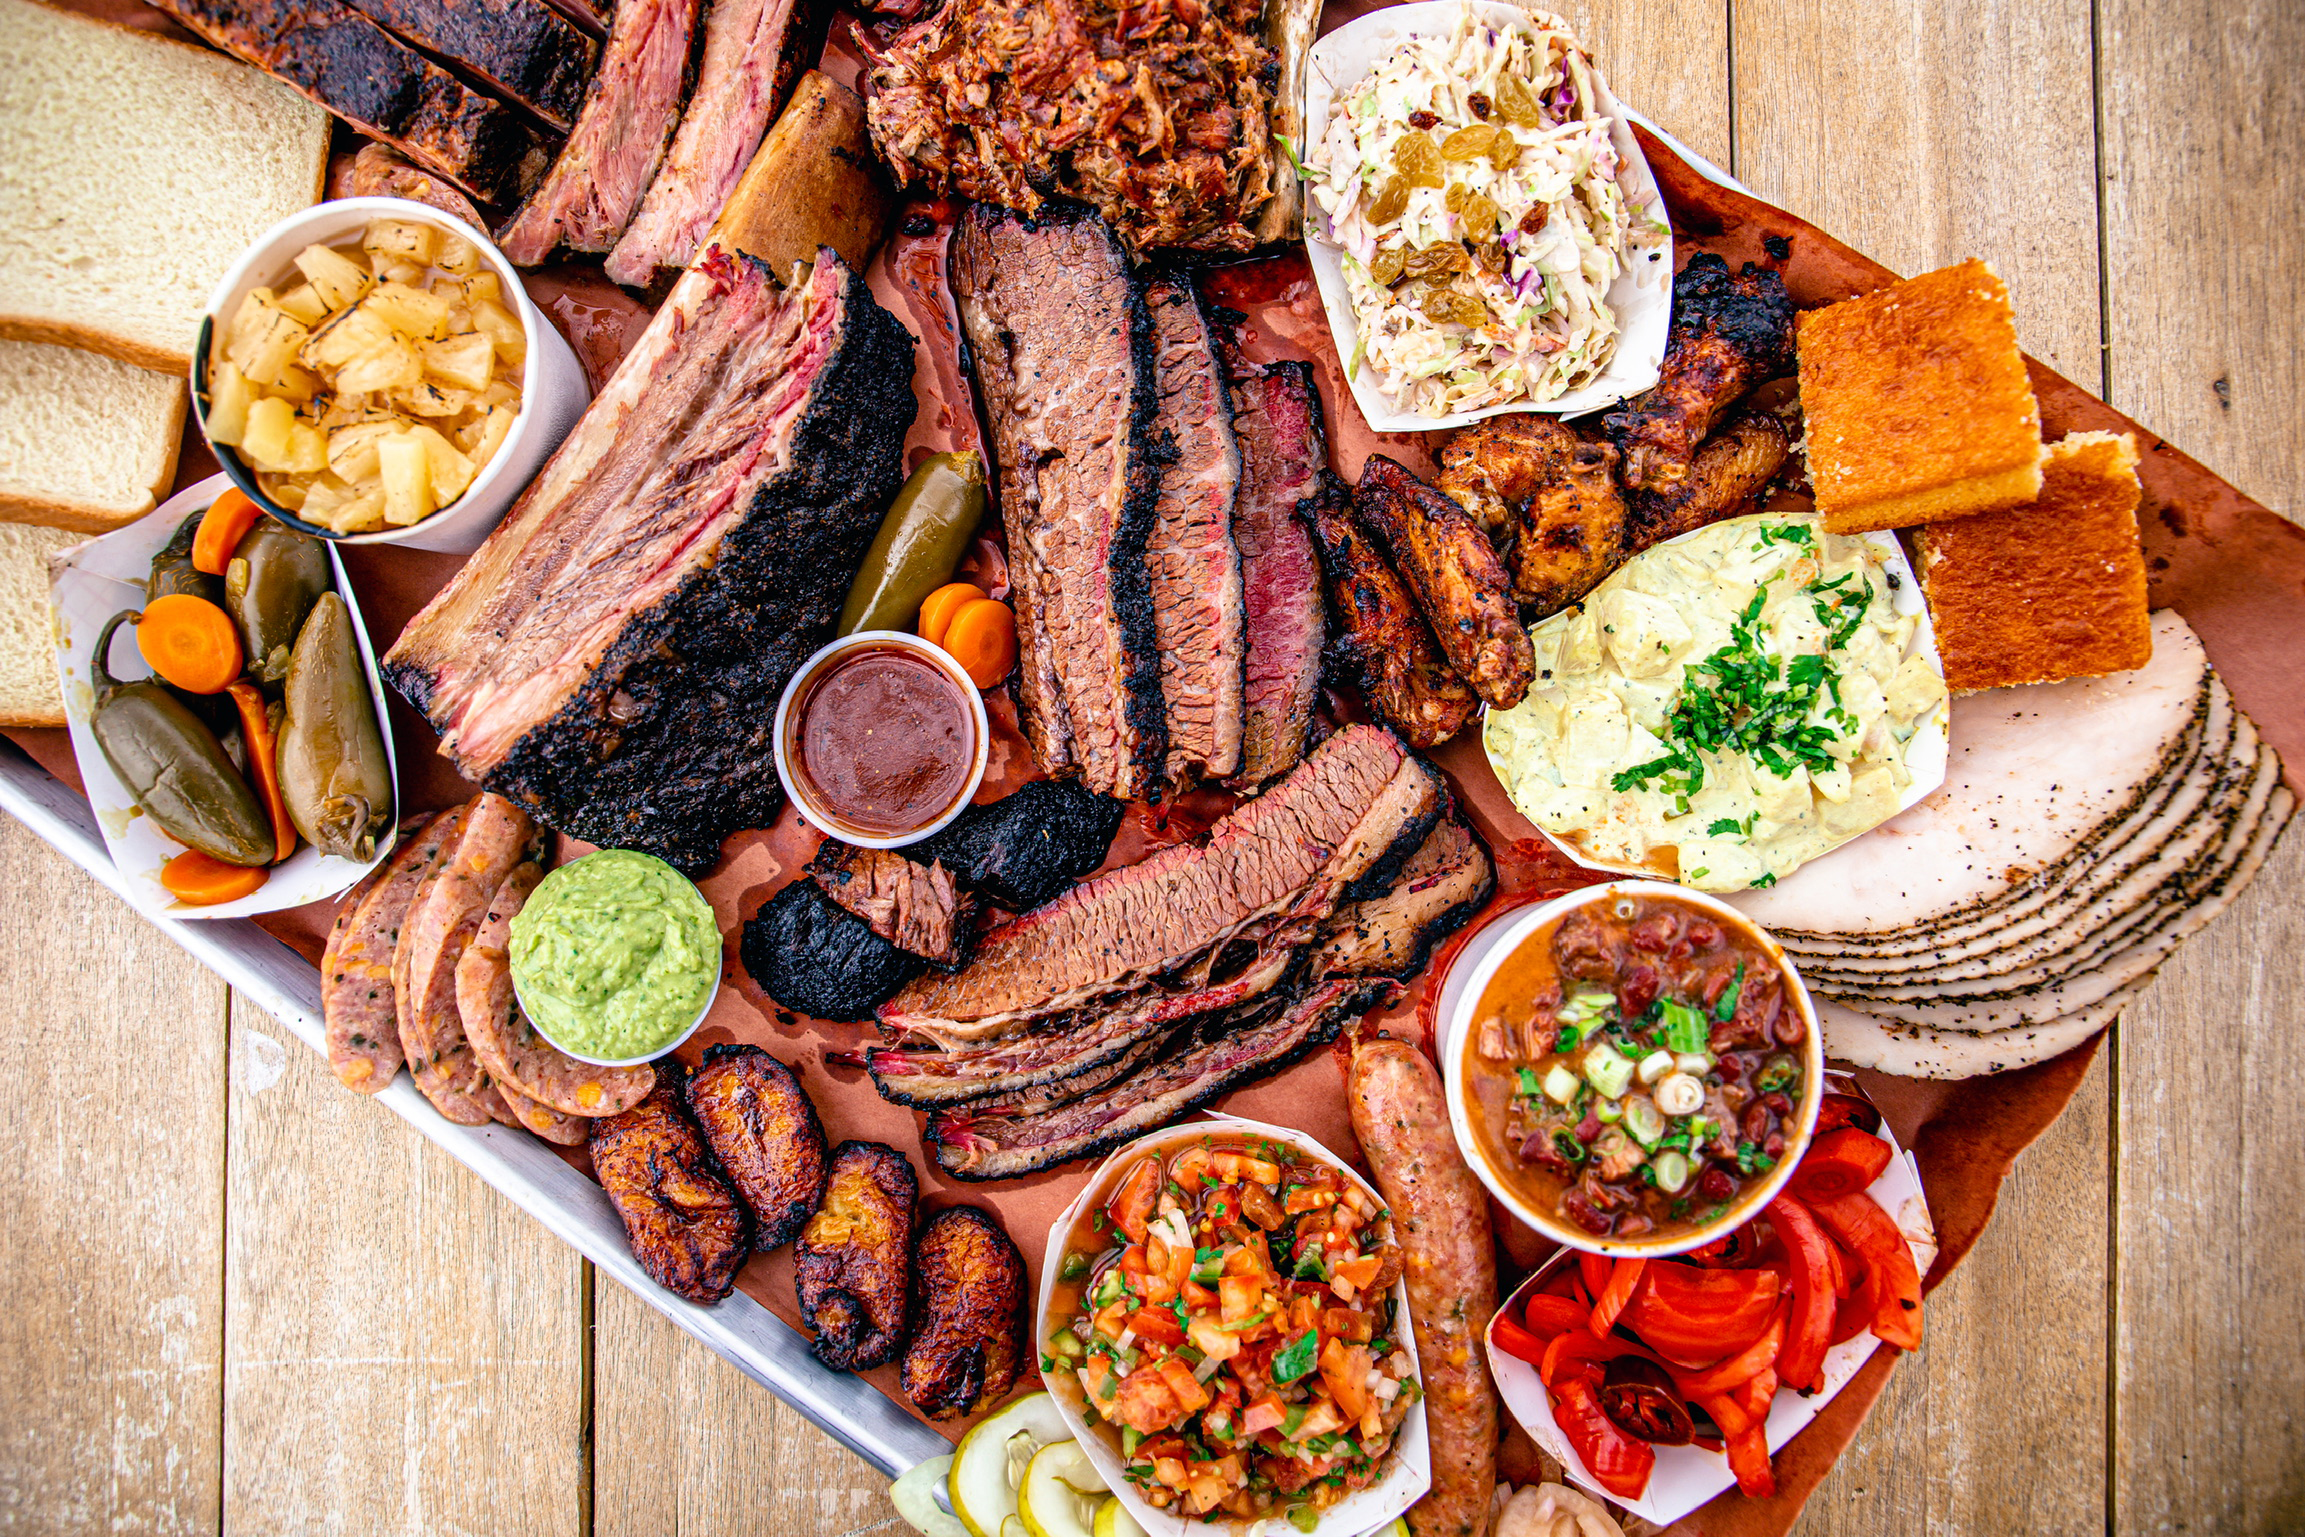 A barbecue feast. Photograph courtesy of 2fifty.